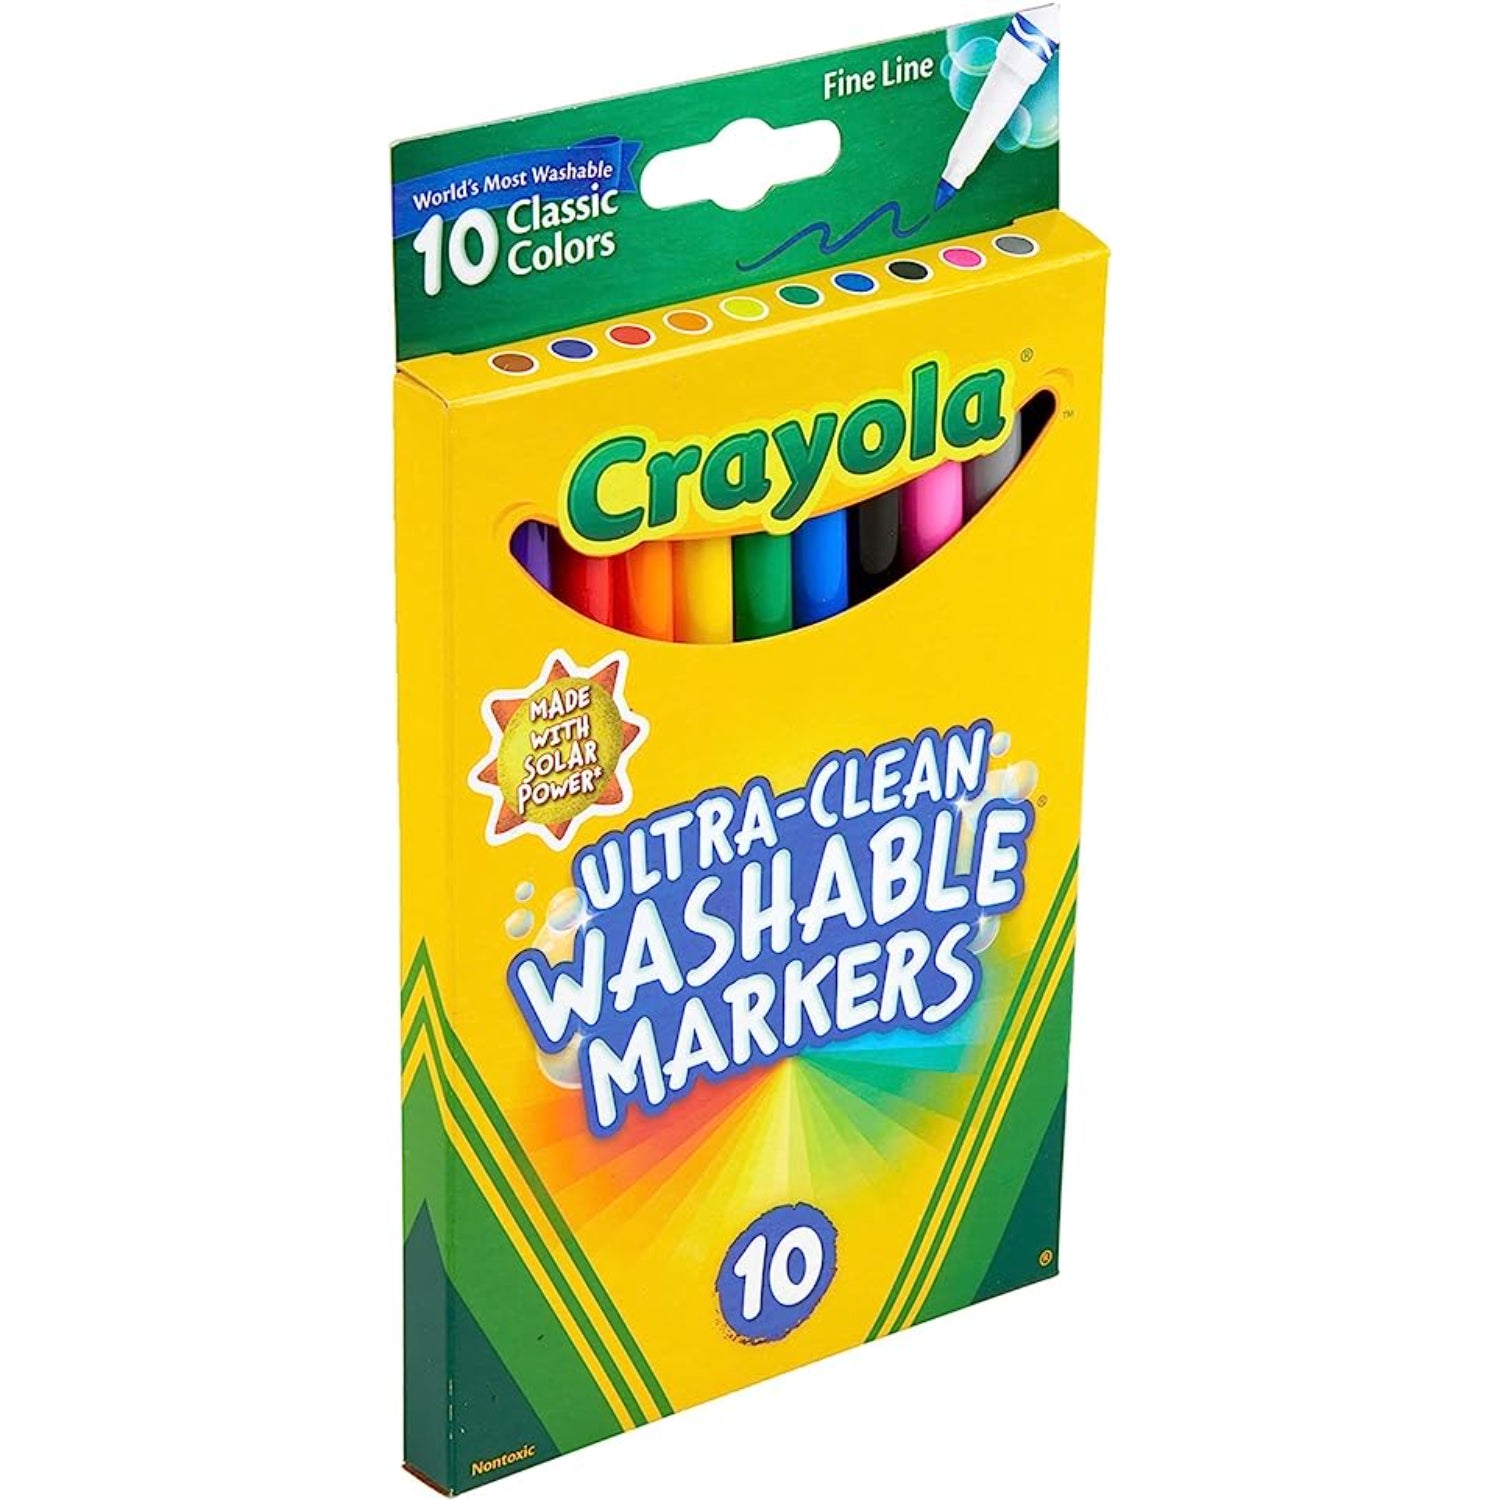 Crayola Ultra-Clean Washable Markers, Fine Line Multicolor, 10 Count